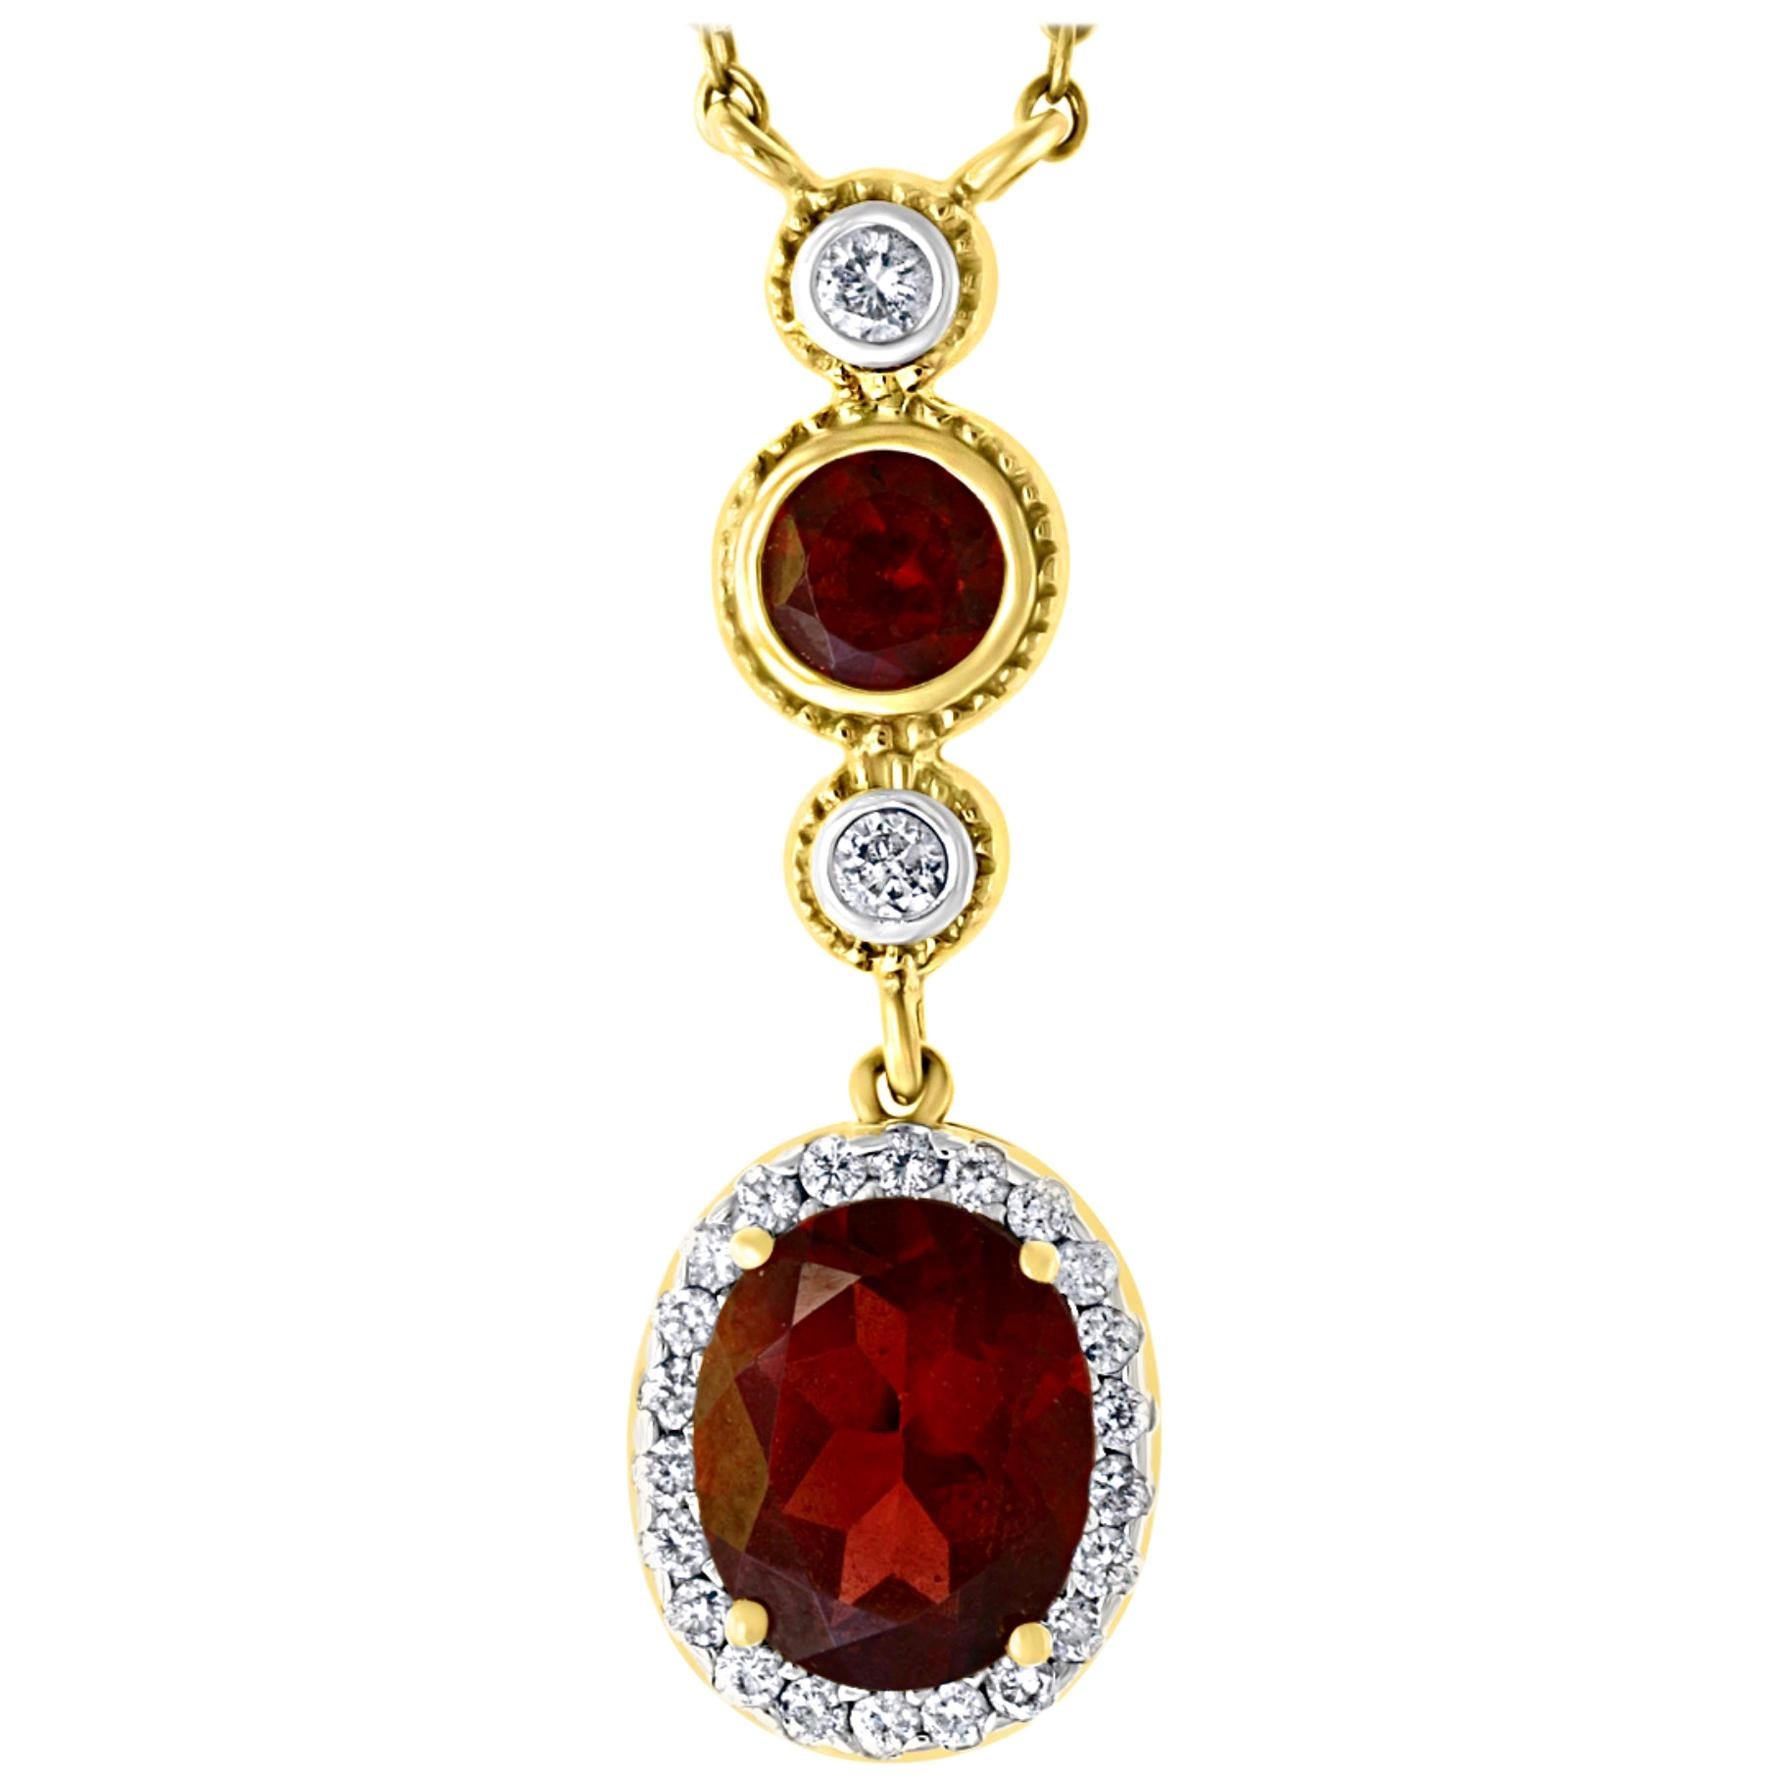 6 Carat Oval Shape Garnet and 0.6 Carat Diamond Necklace in 14 Karat Yellow Gold For Sale